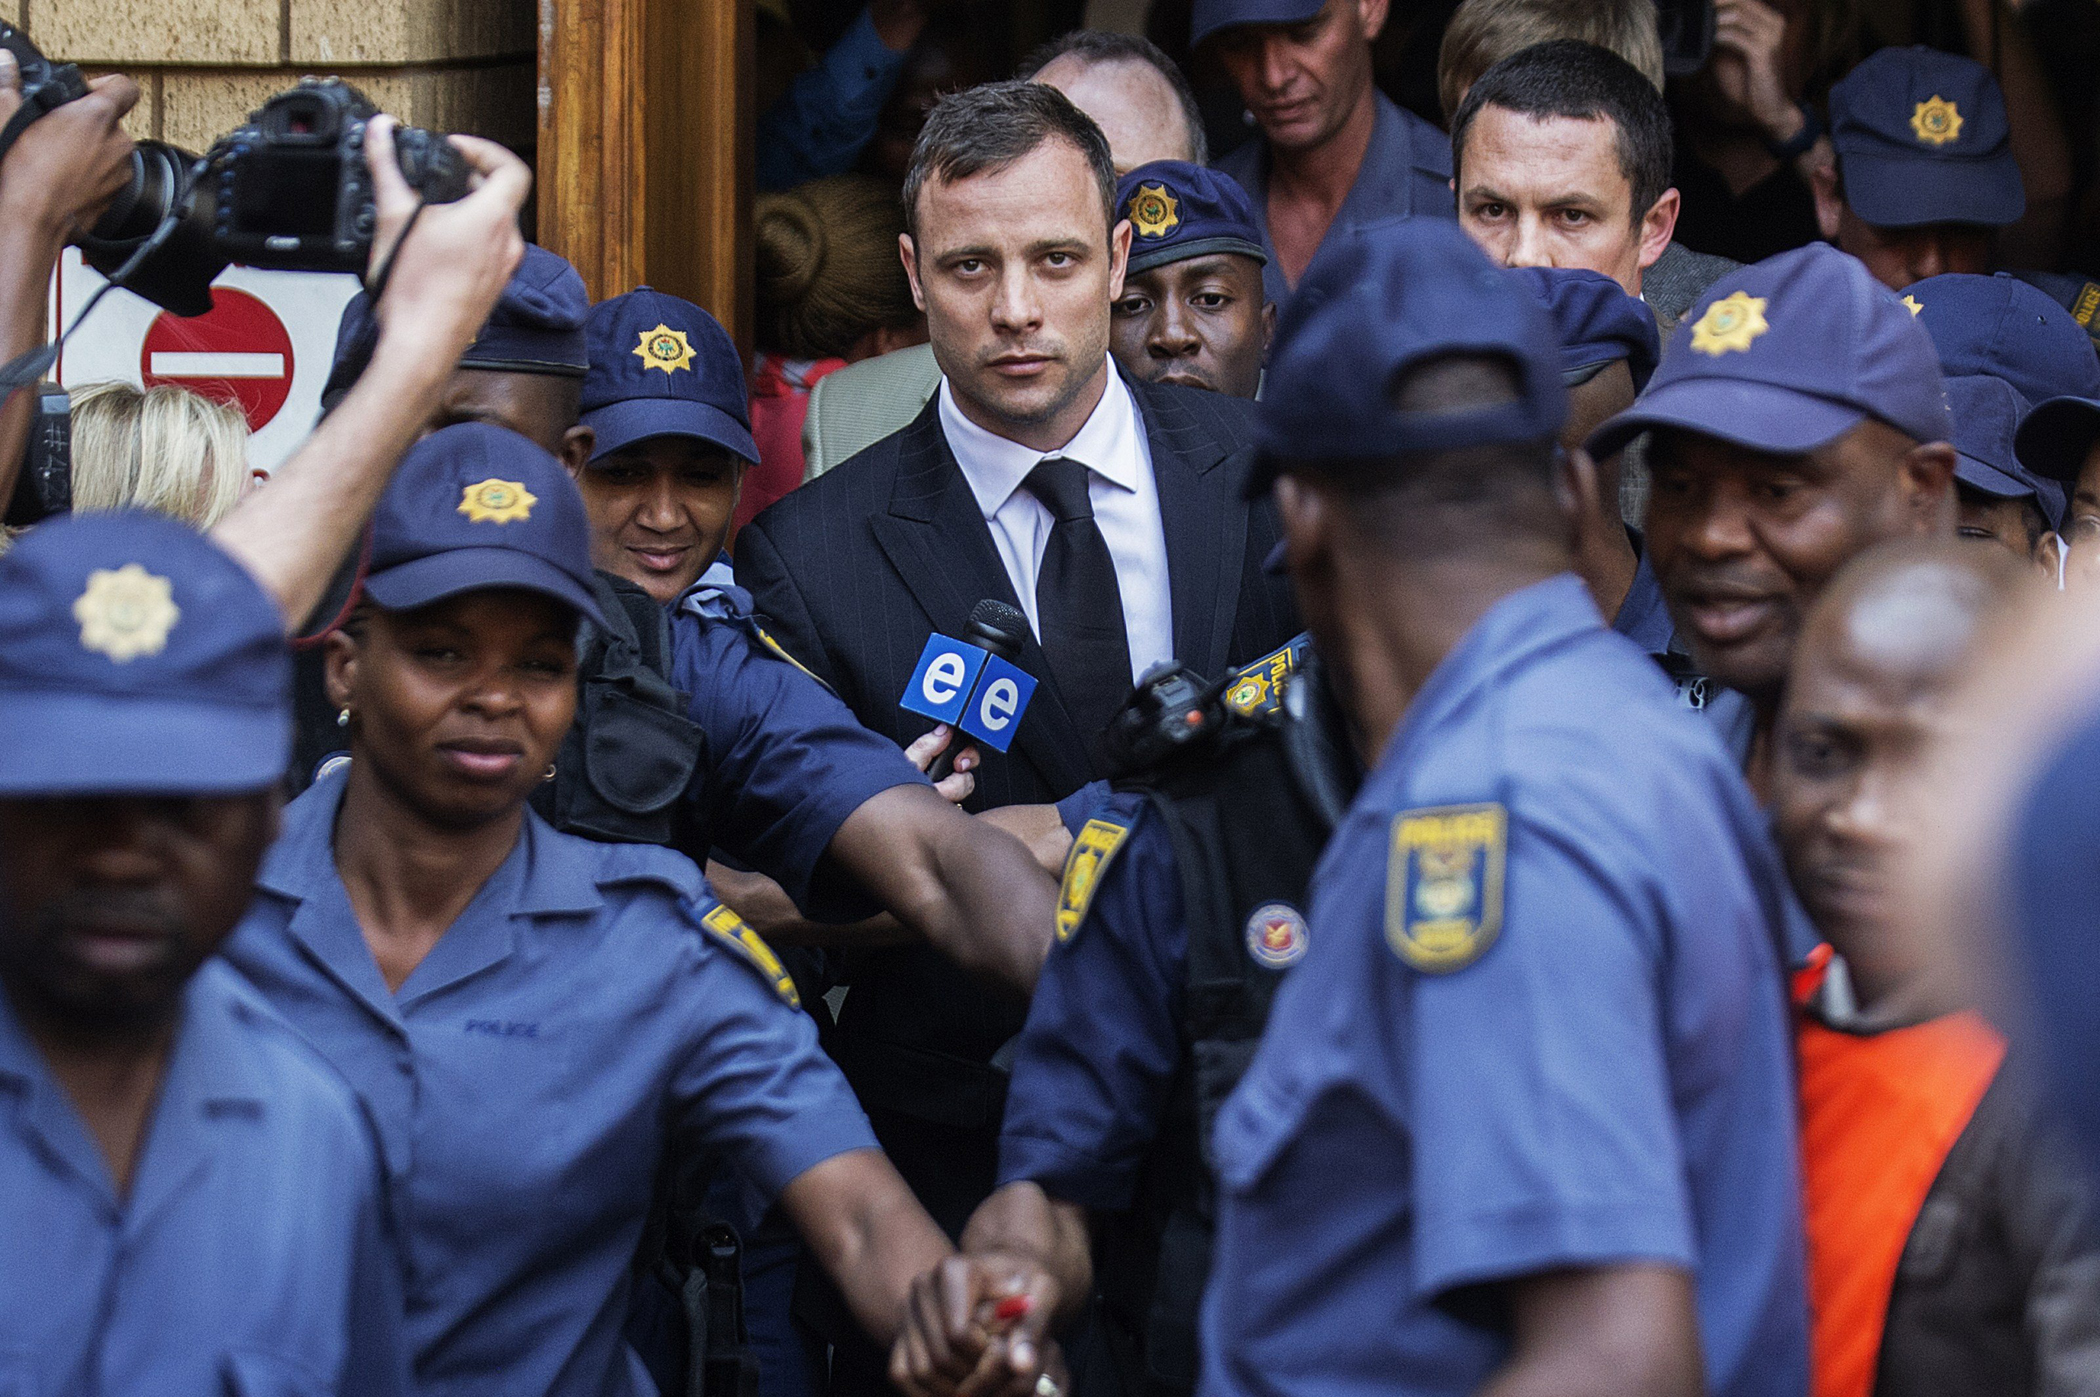 South African Paralympian athlete Oscar Pistorius leaves the High Court after the verdict in his murder trial where he was found guilty of culpable homicide in Pretoria, South Africa on Sept. 12, 2014. (Gianluigi Guercia—AFP/Getty Images)